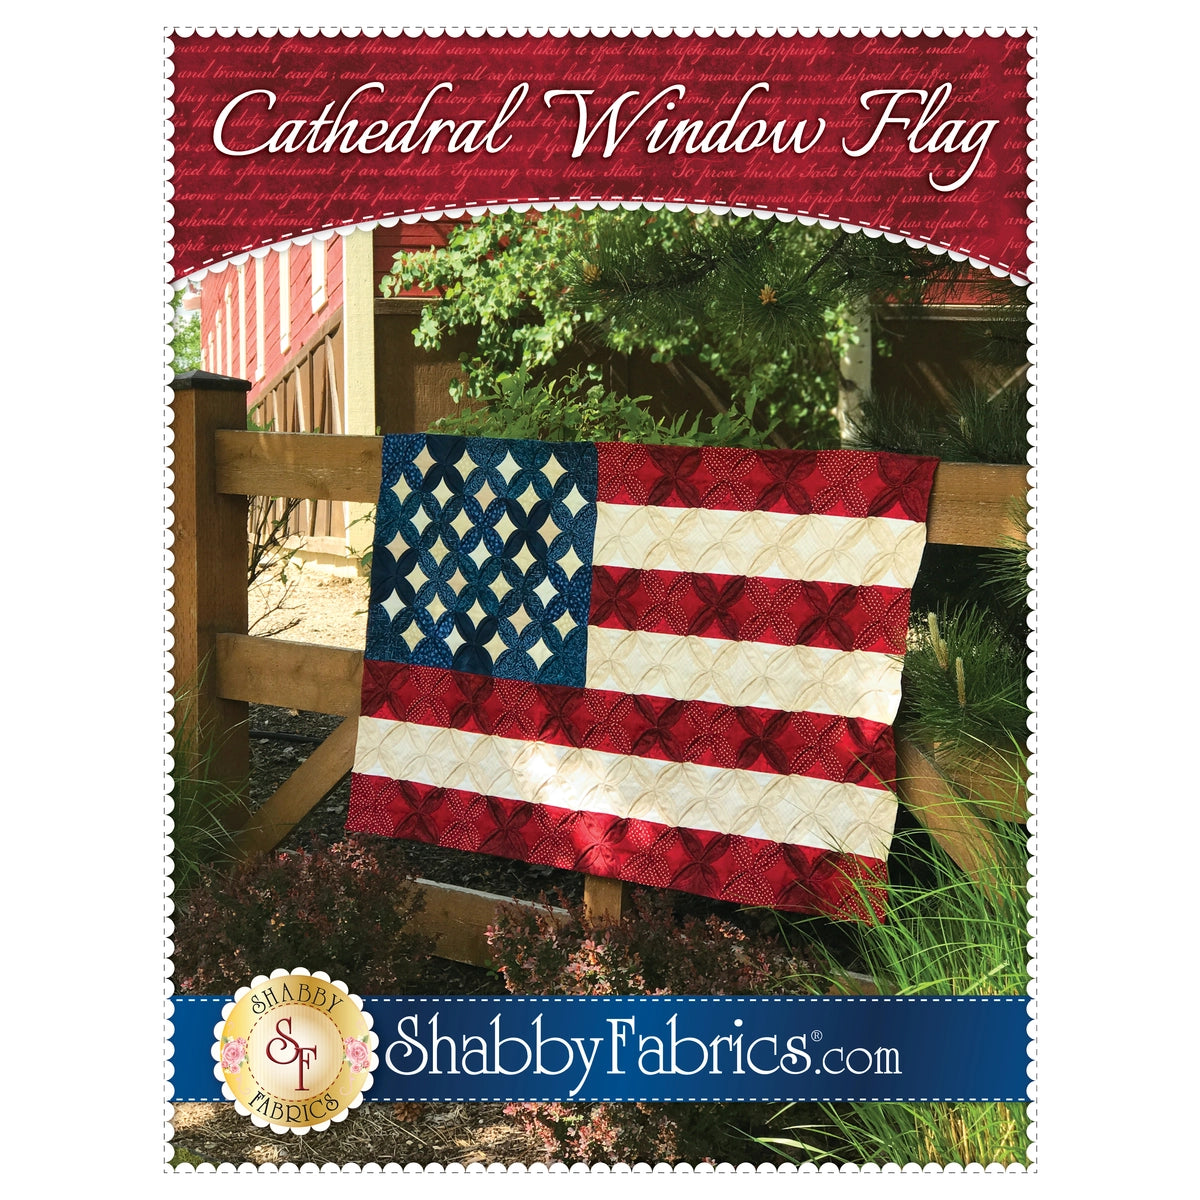 Shabby Fabrics Cathedral Window Flag Quilt Pattern